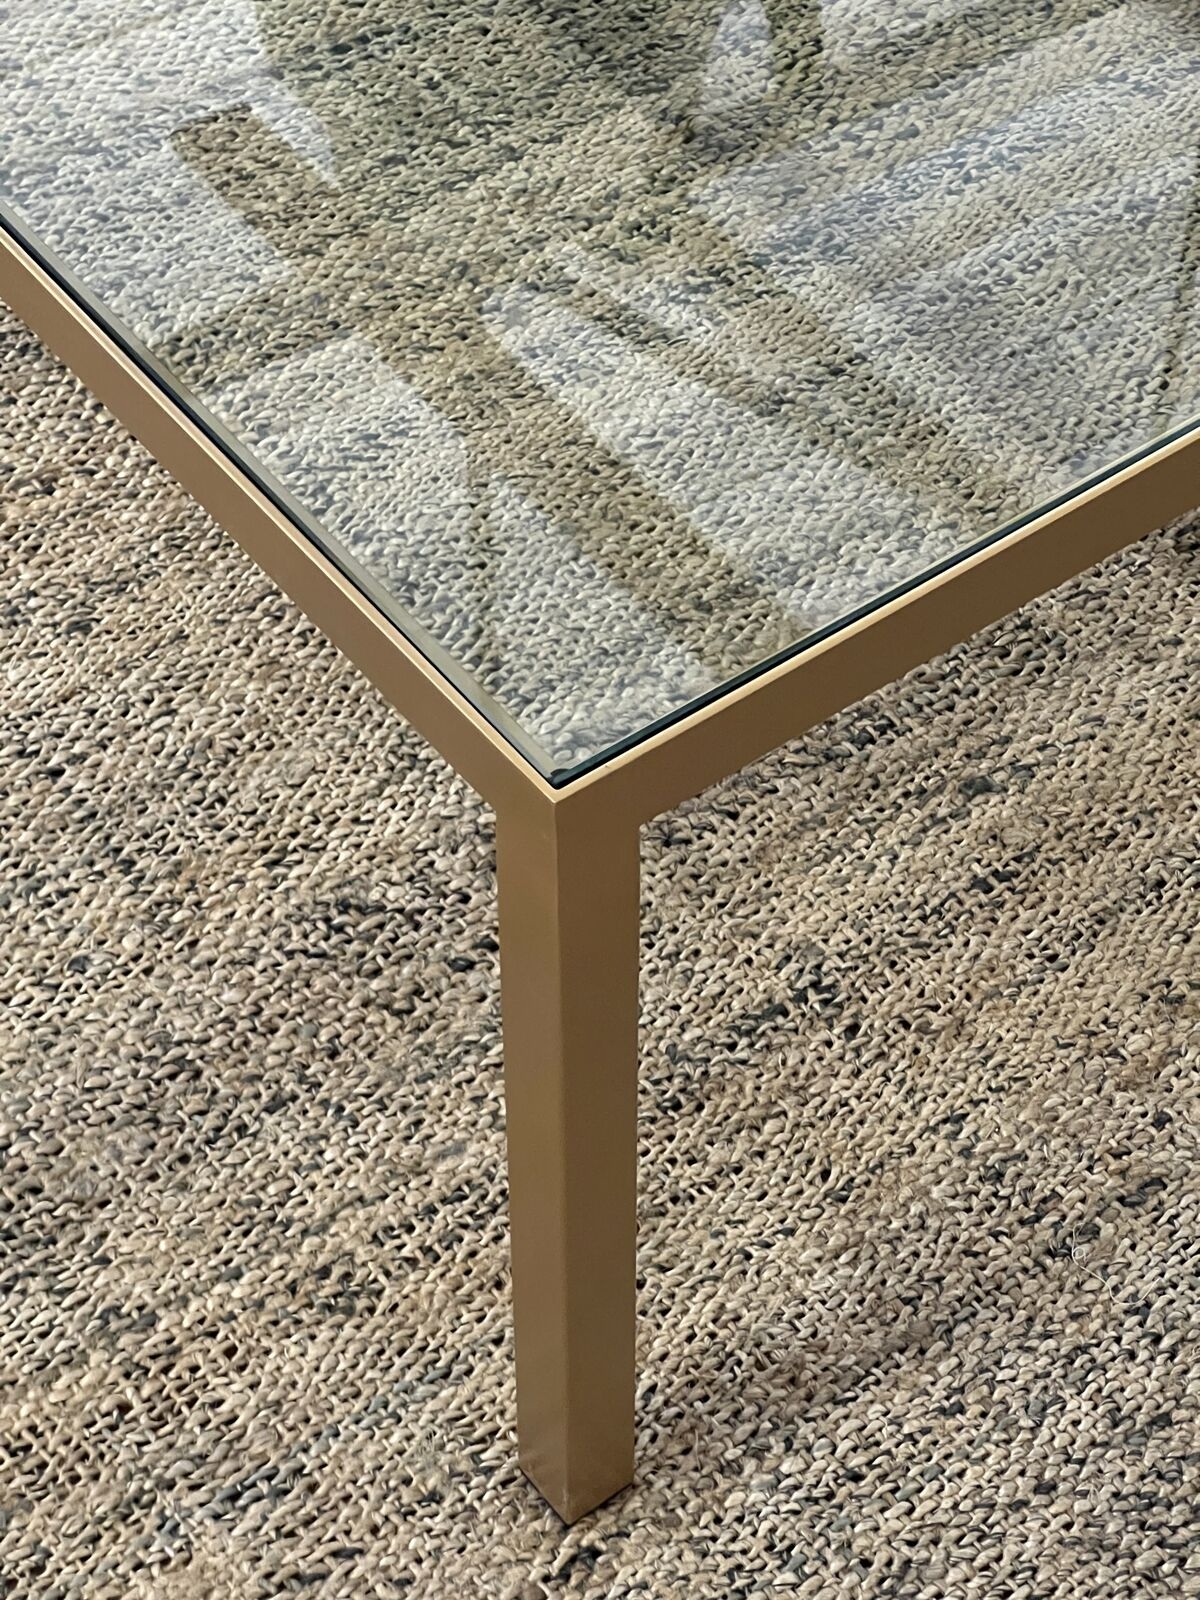 Sibley coffee table metal frame with glass top